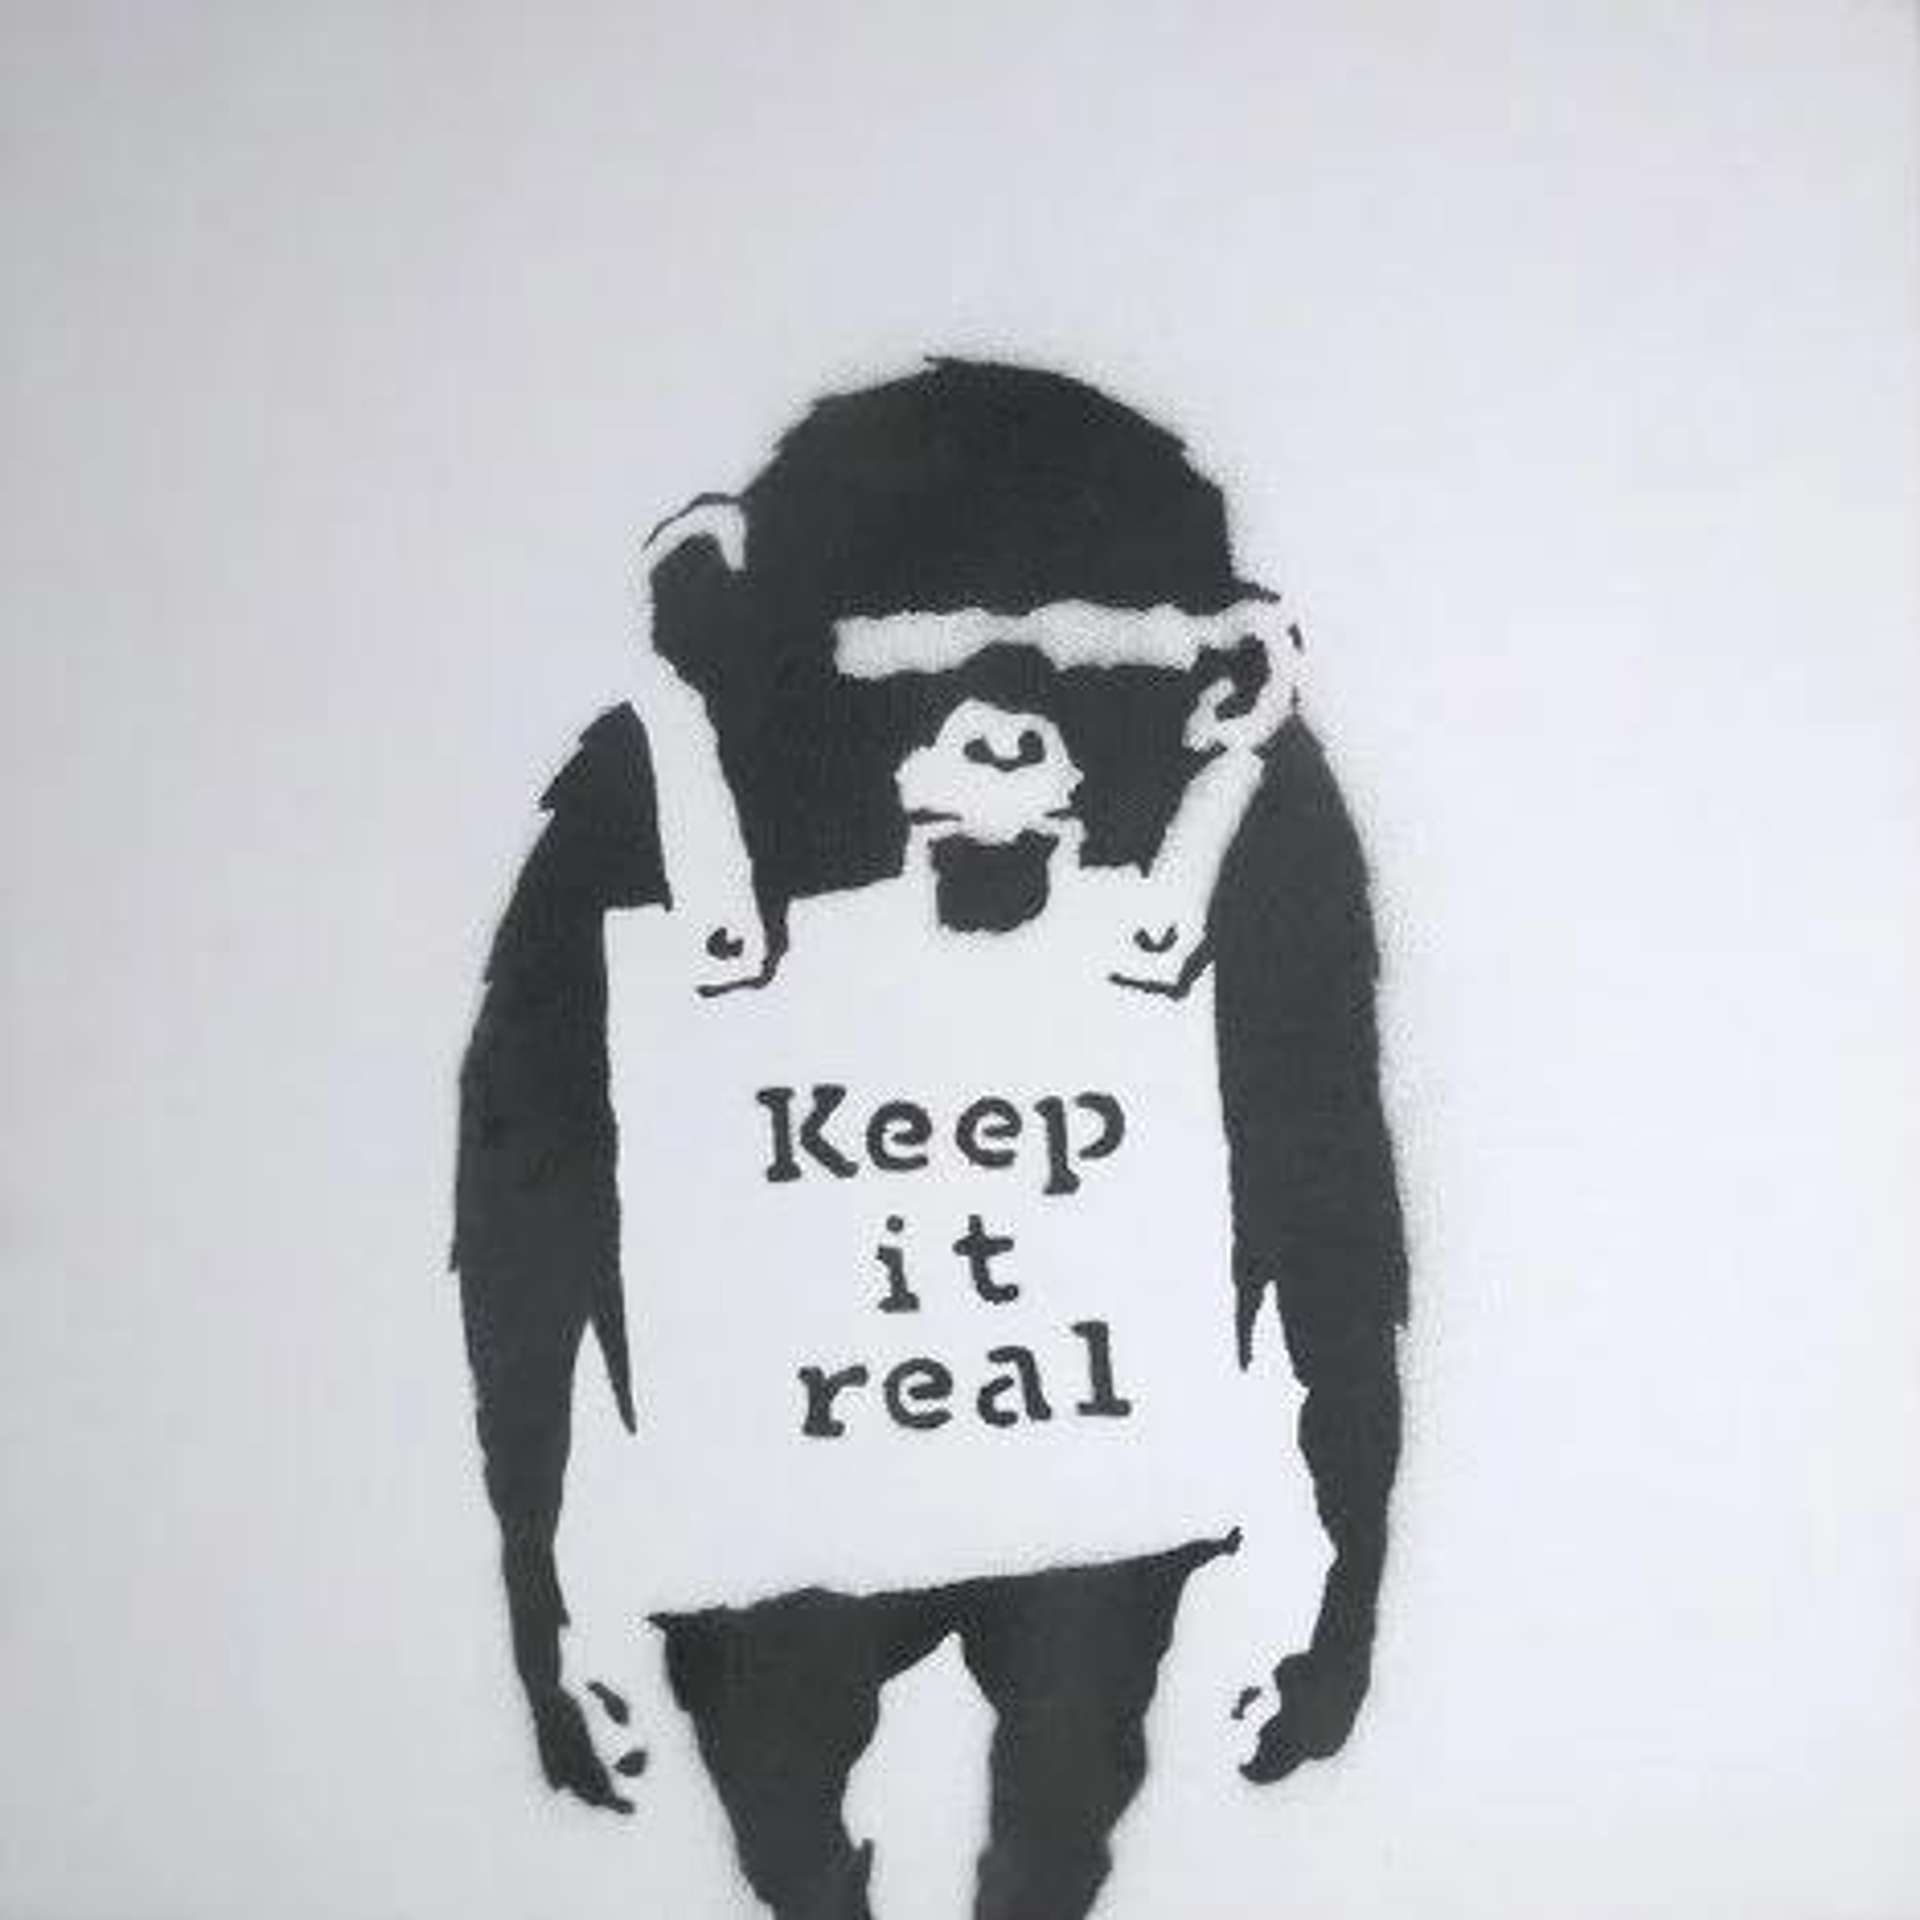 Keep It Real by Banksy